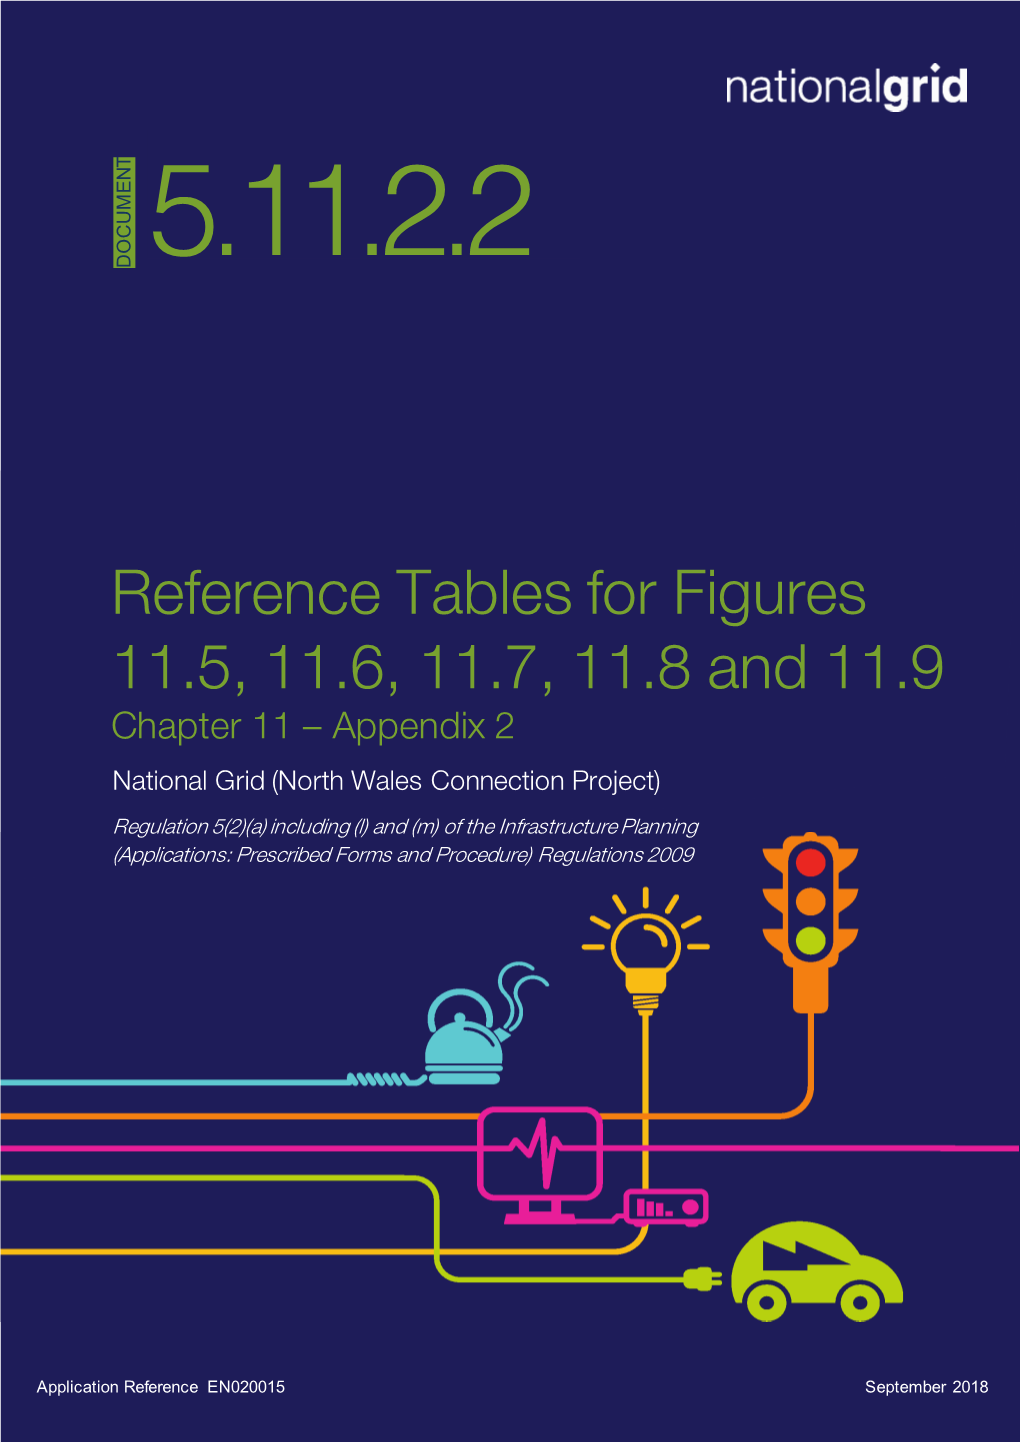 Reference Tables for Figures 11.5, 11.6, 11.7, 11.8 and 11.9 Document 5.11.2.2 I